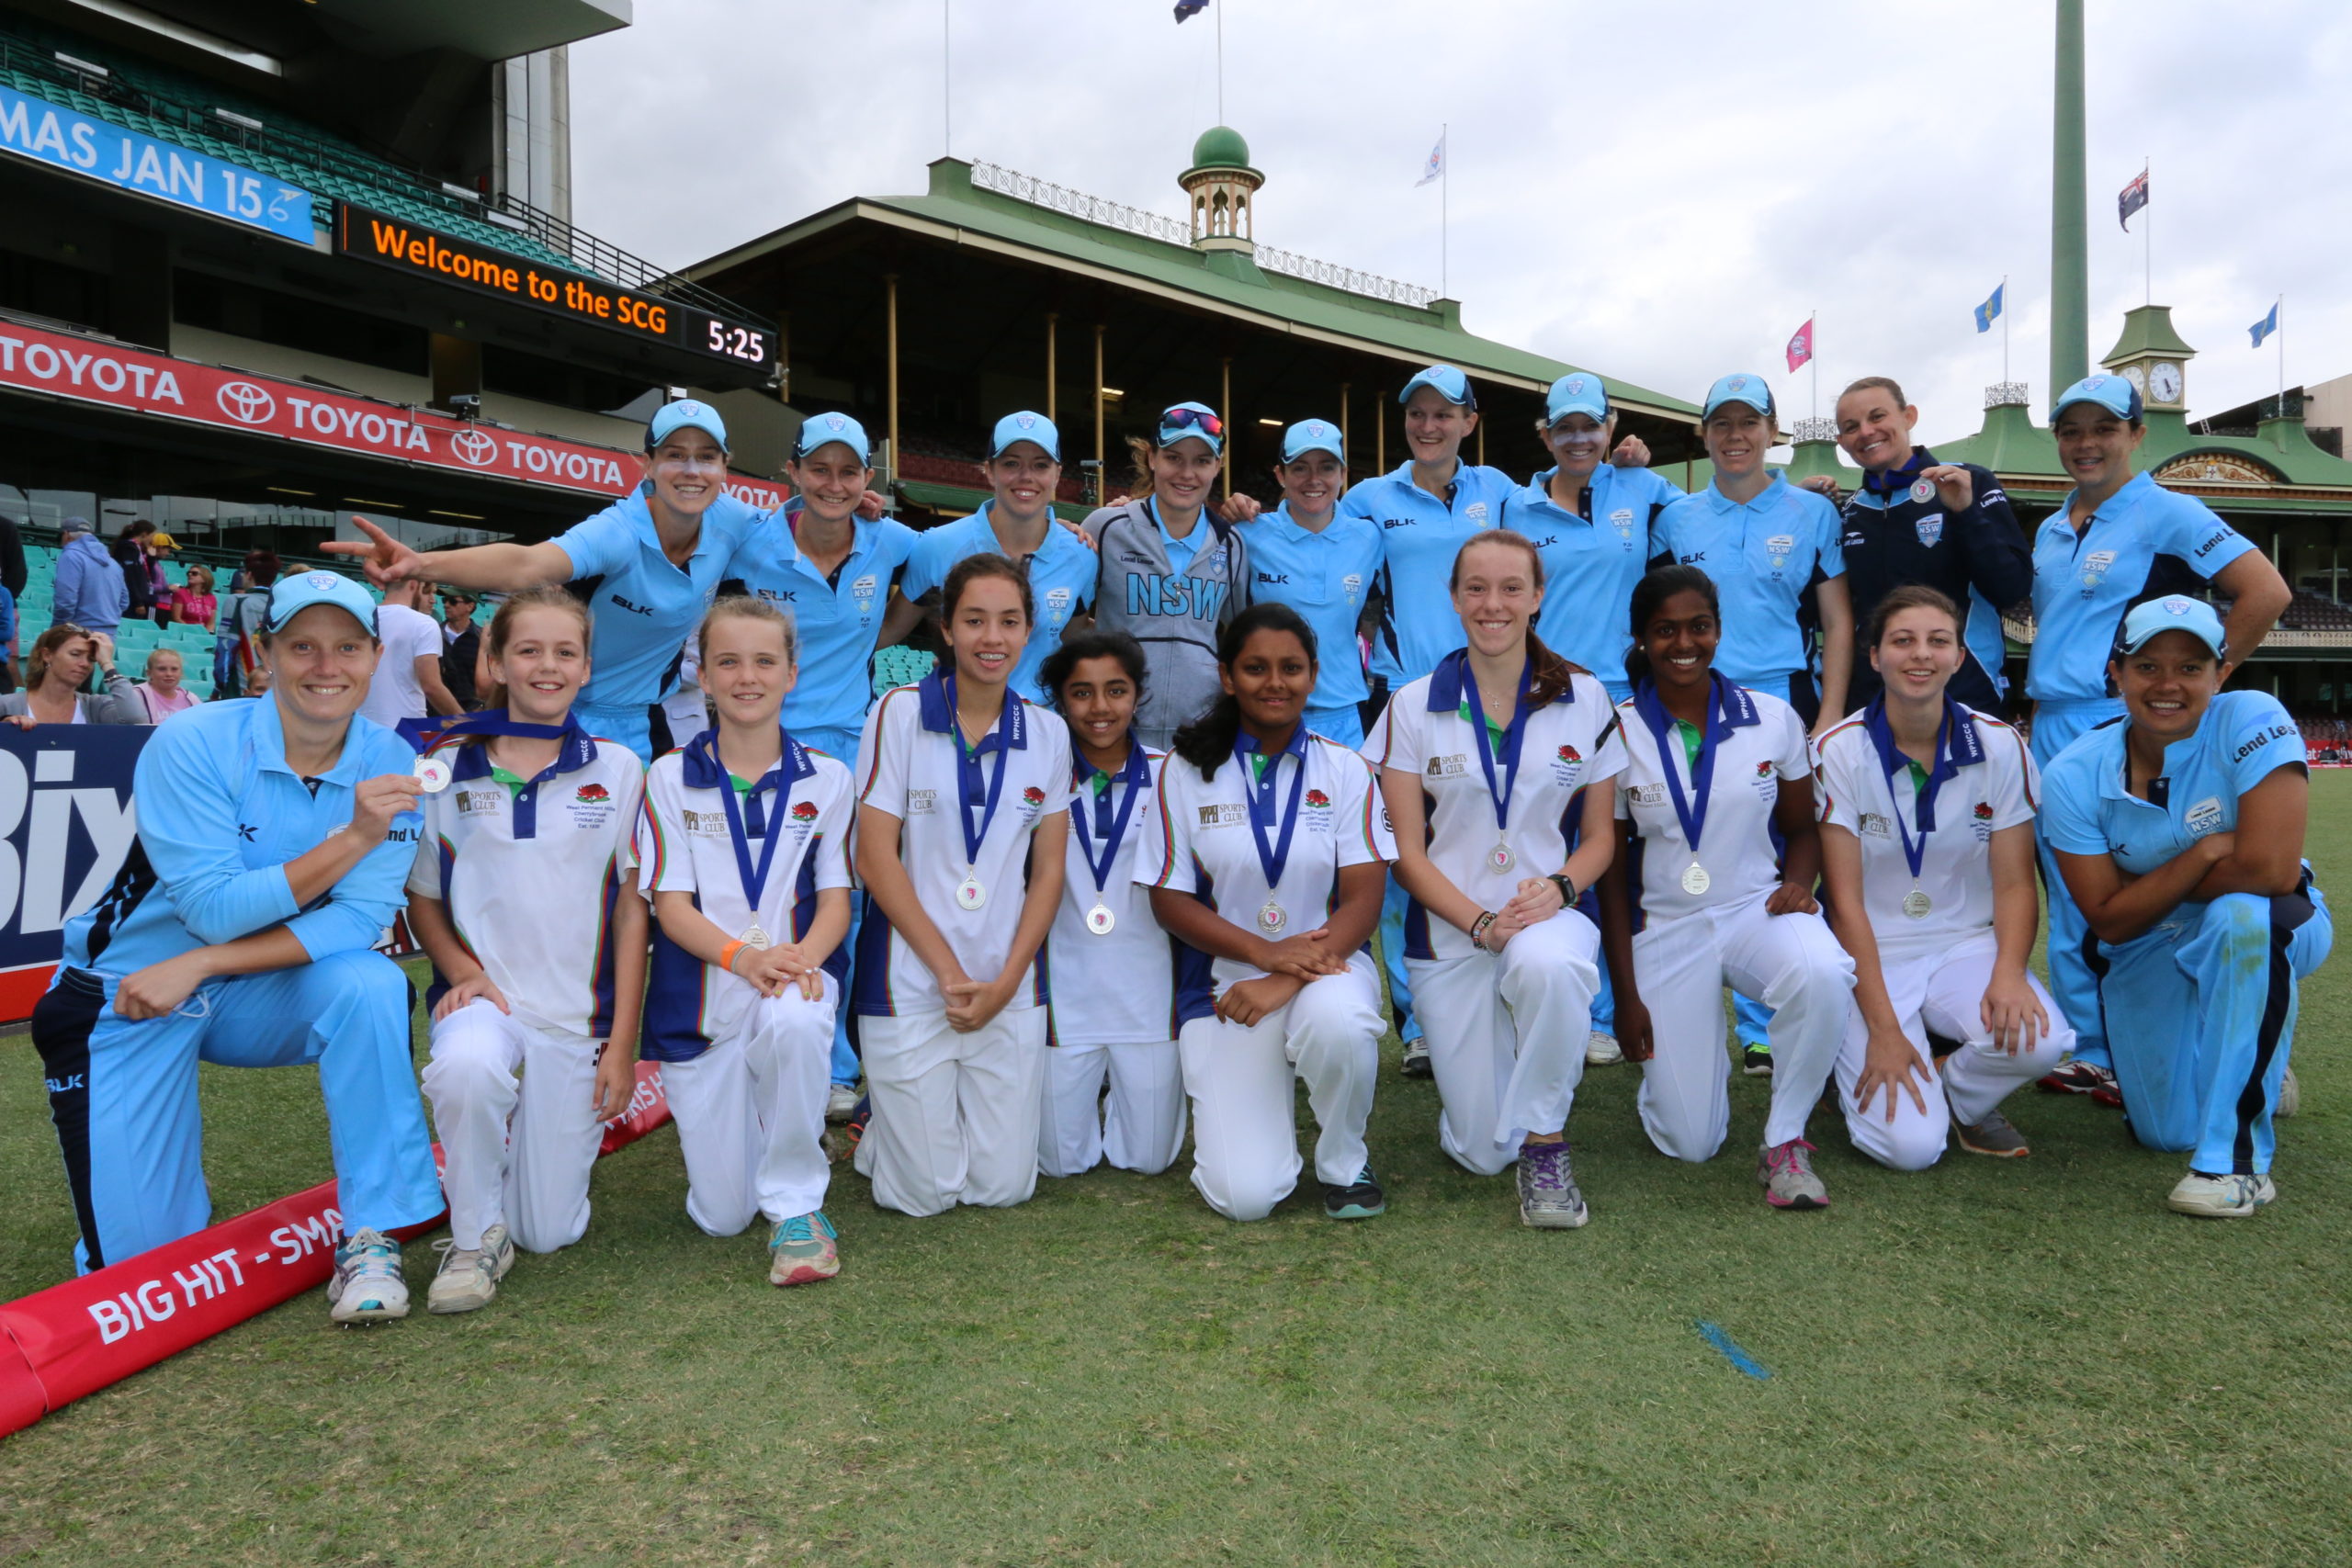 SCG Premiers with the Breakers